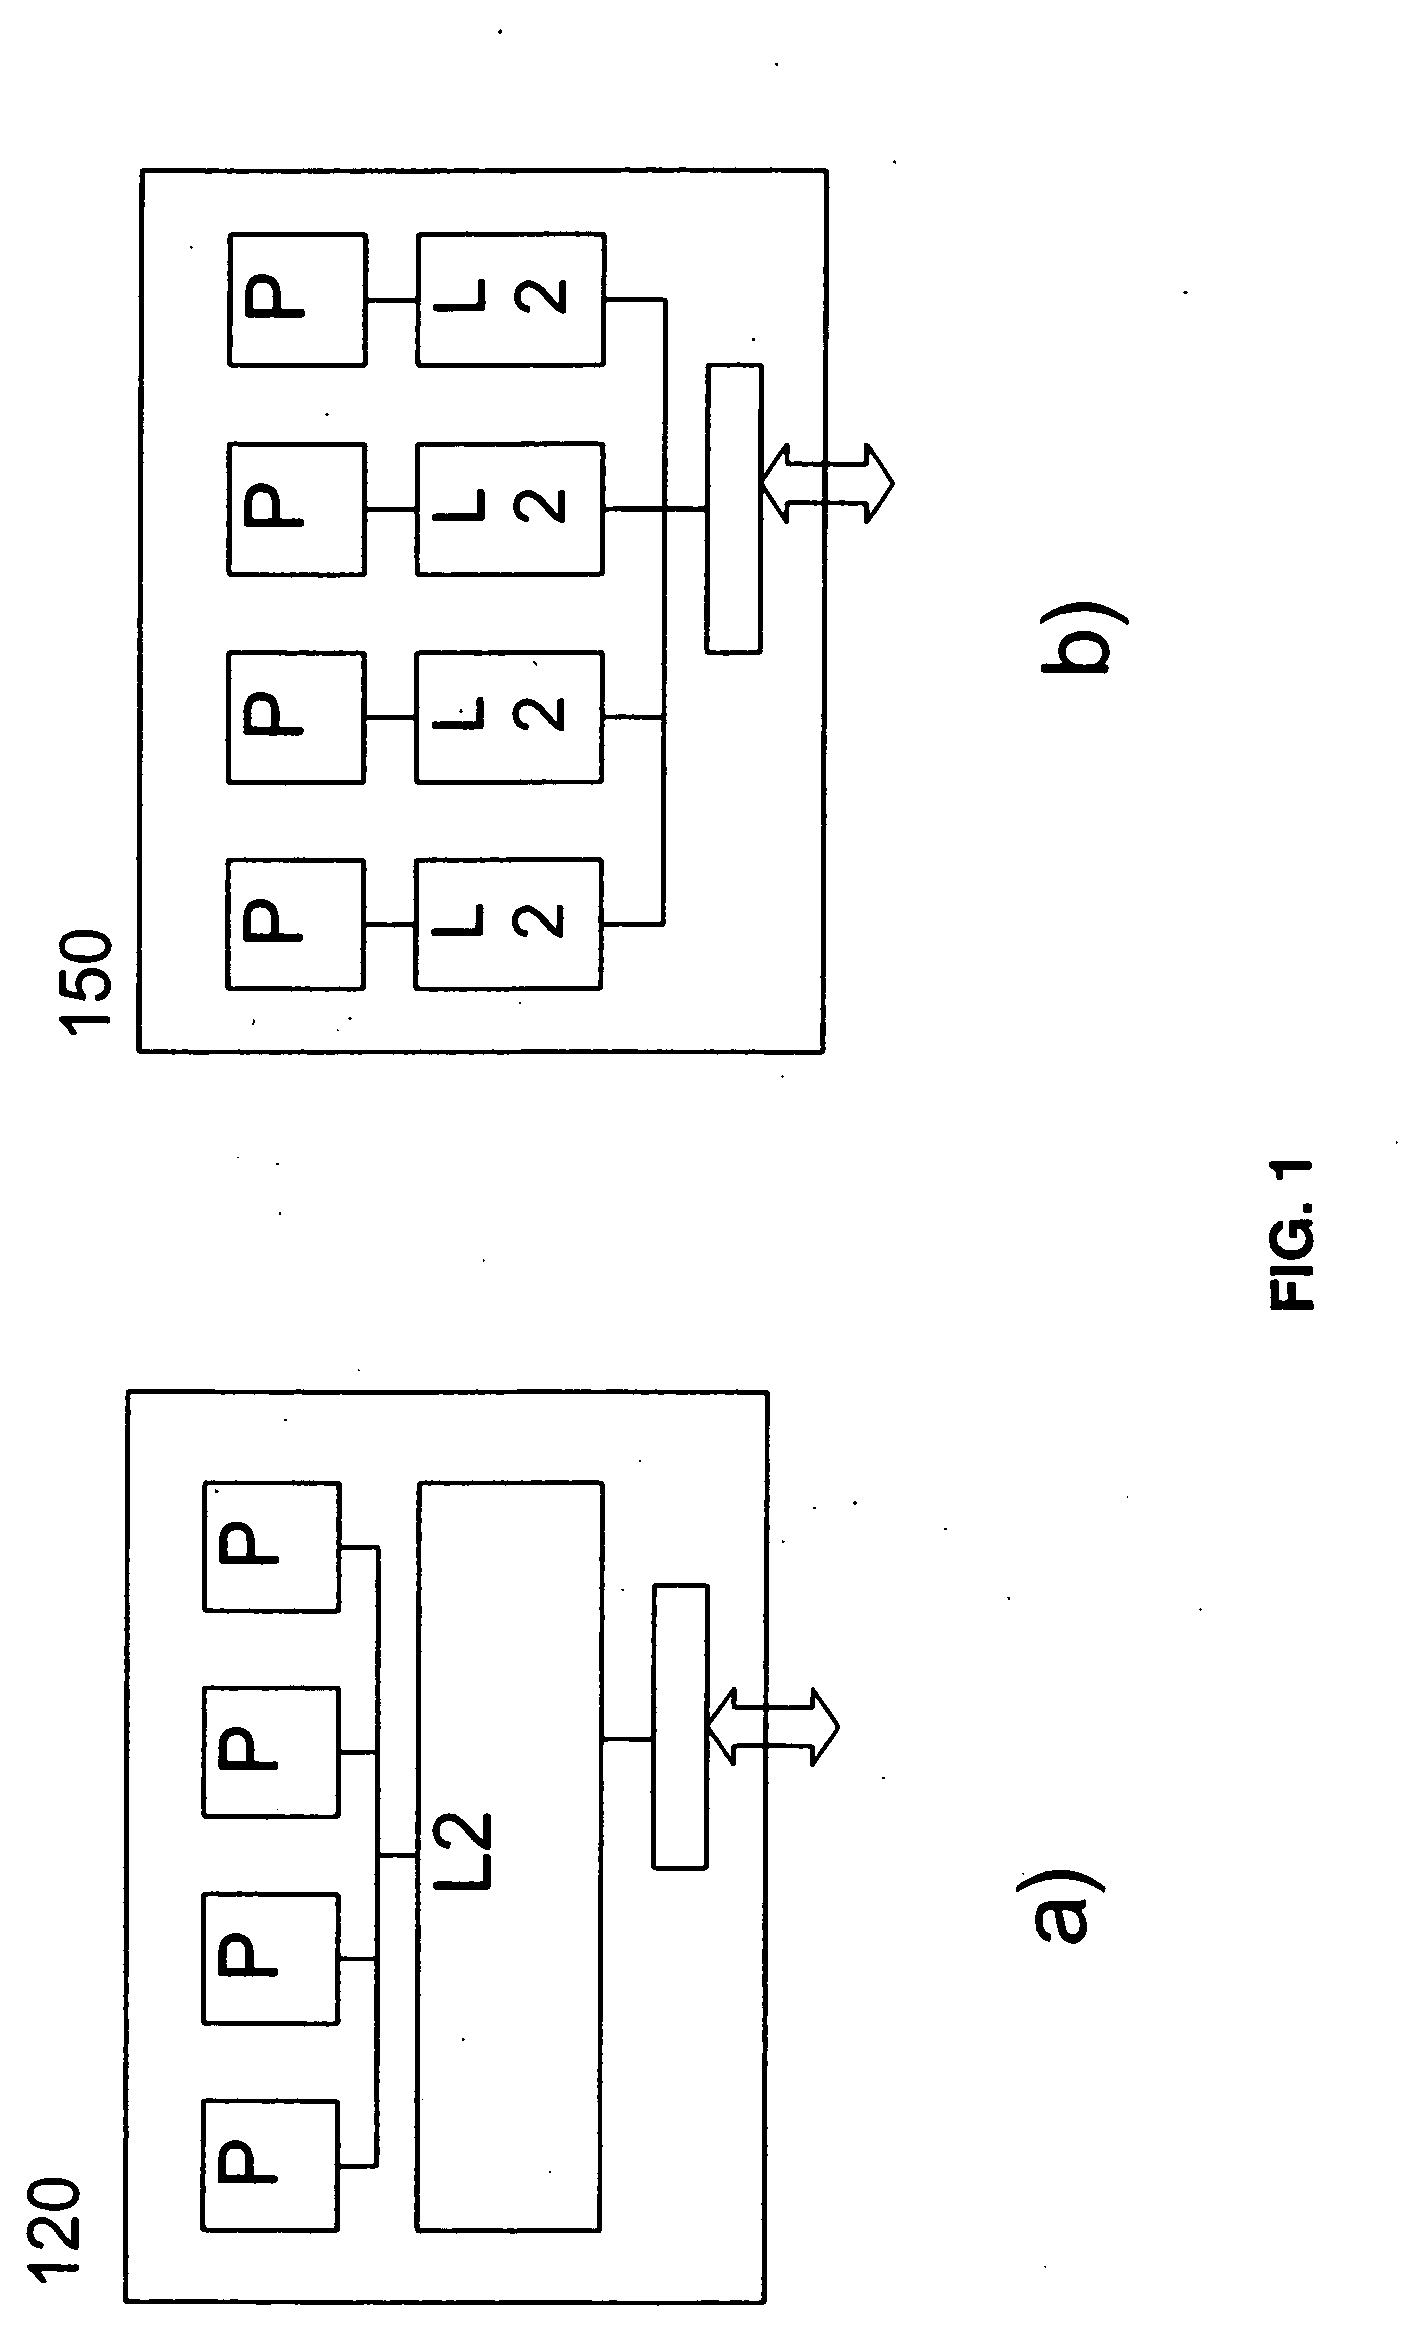 Methods and arrangements for reducing latency and snooping cost in non-uniform cache memory architectures